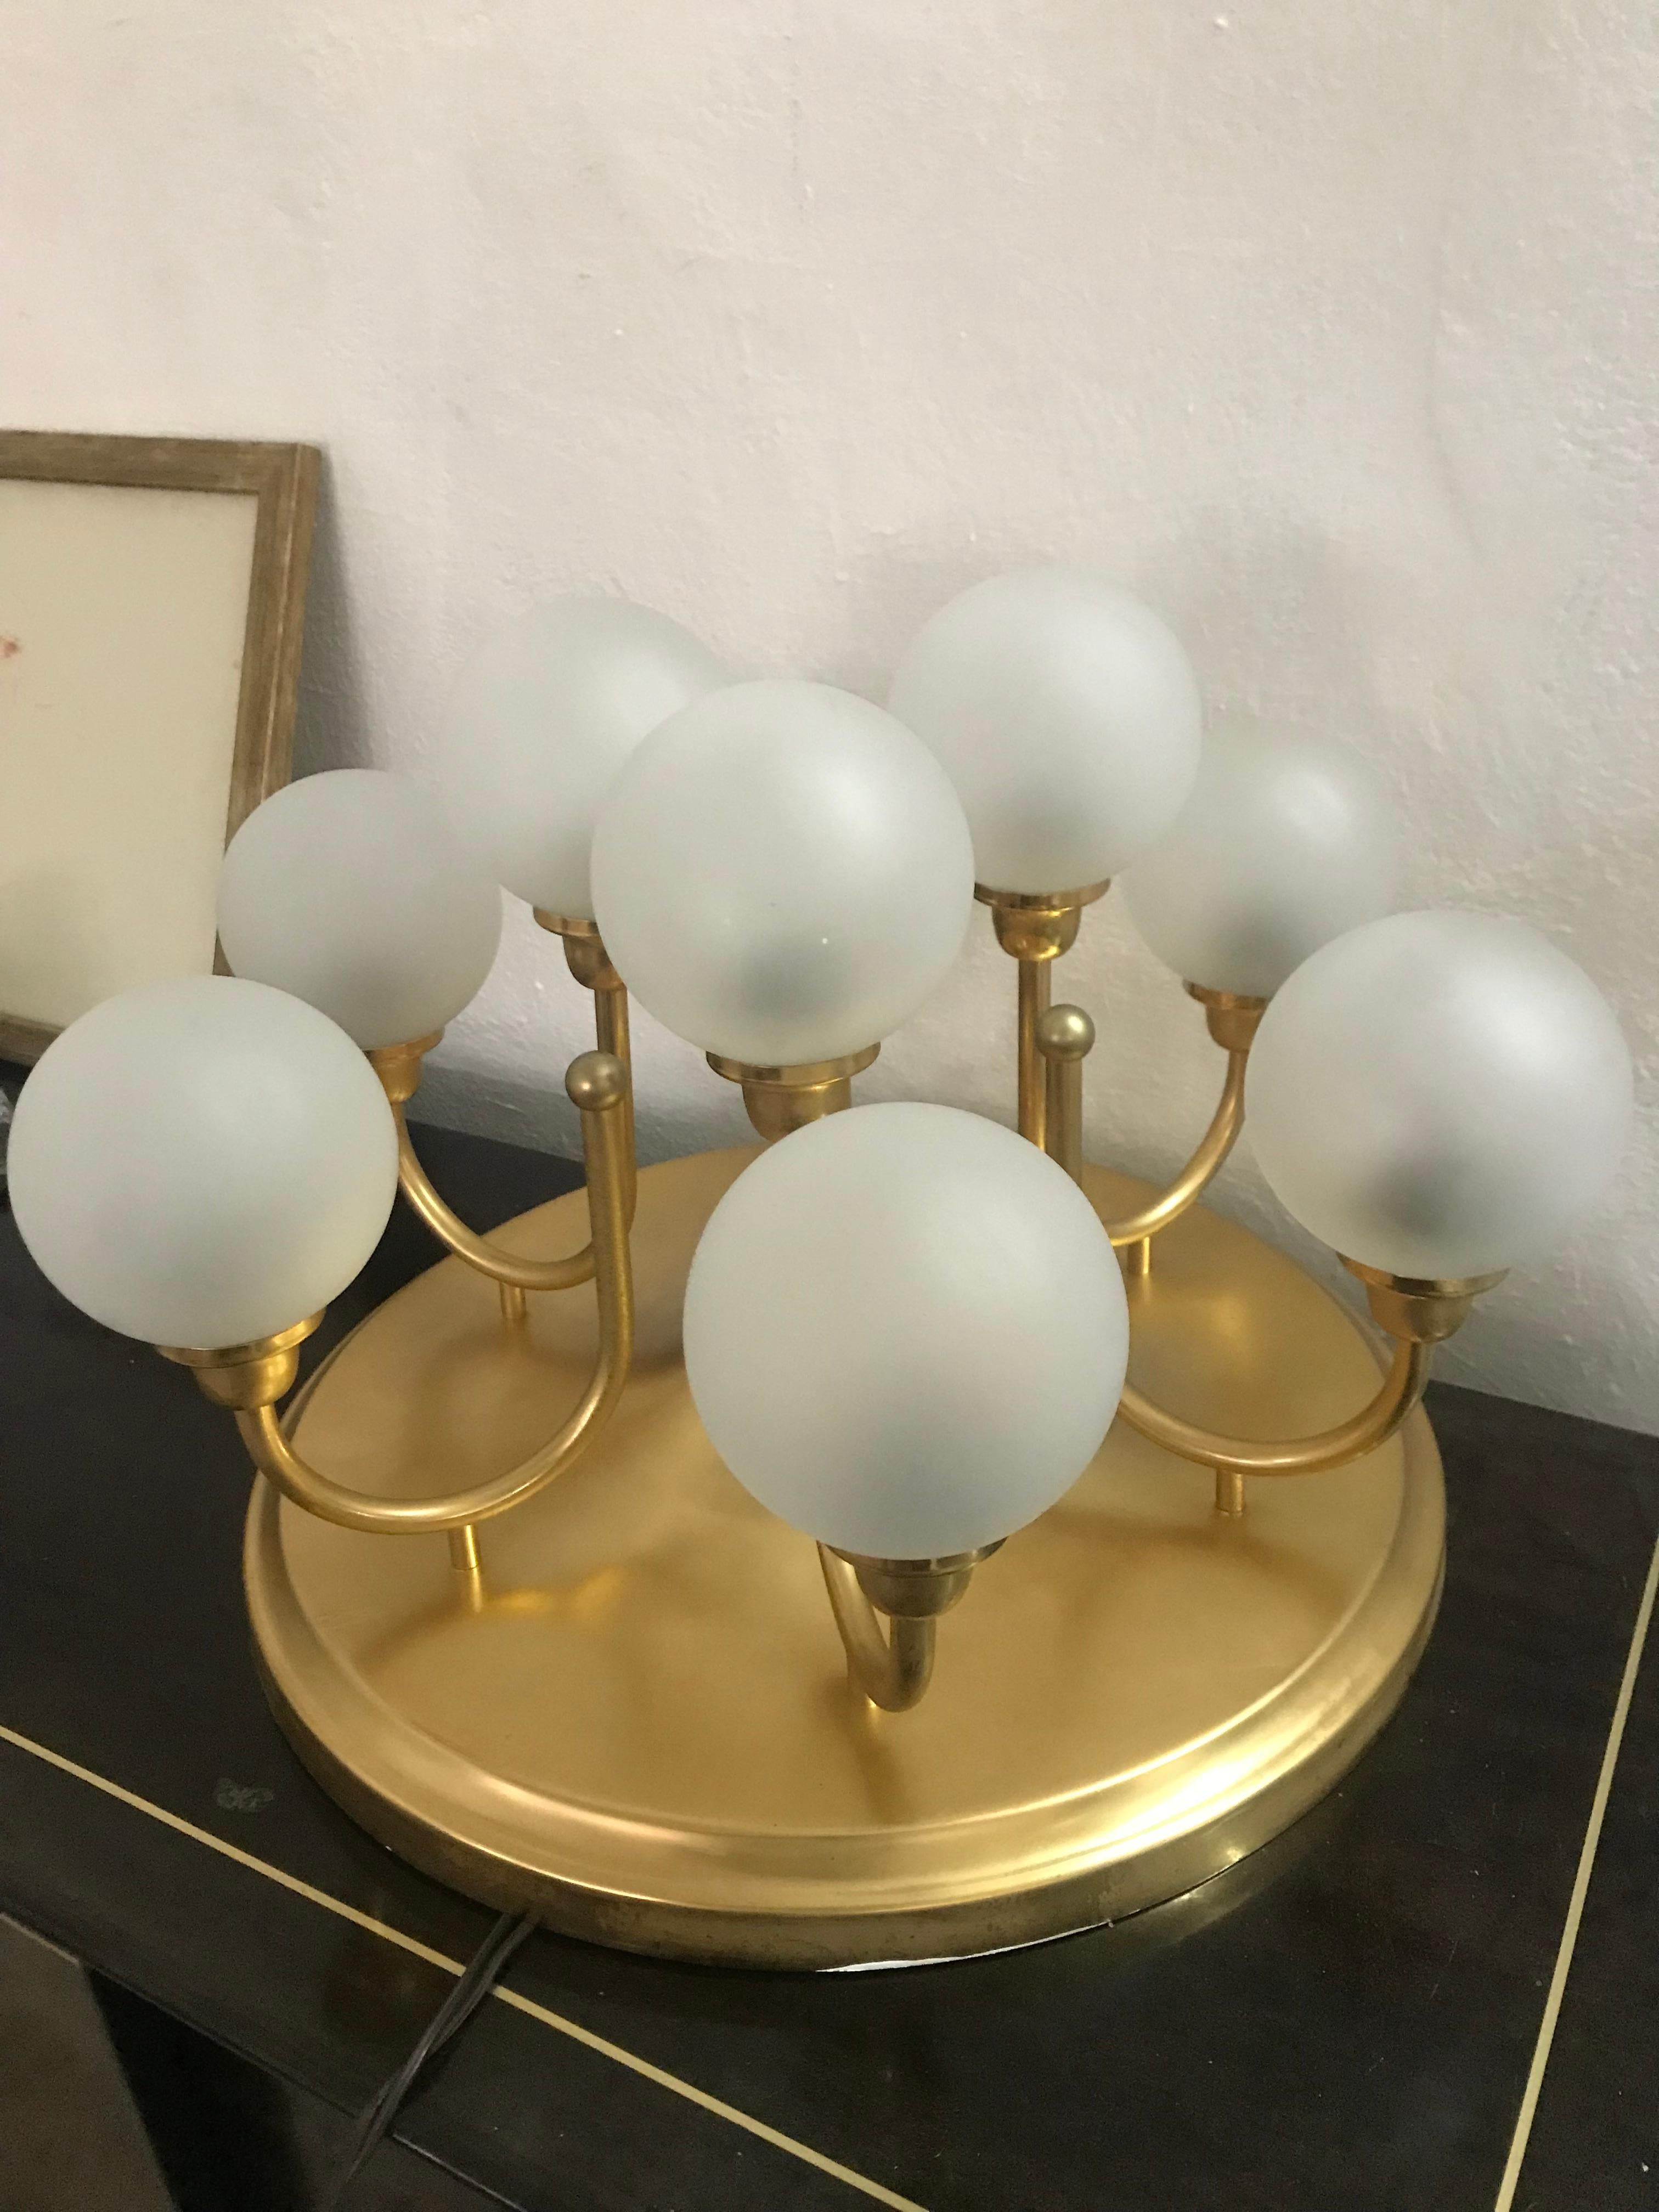 Mid-Century Modern 9 Light plafonnier or flush mount by Kinkeldey, Made in Austria, circa 1970, still retaining the original Label and in great vintage condition.